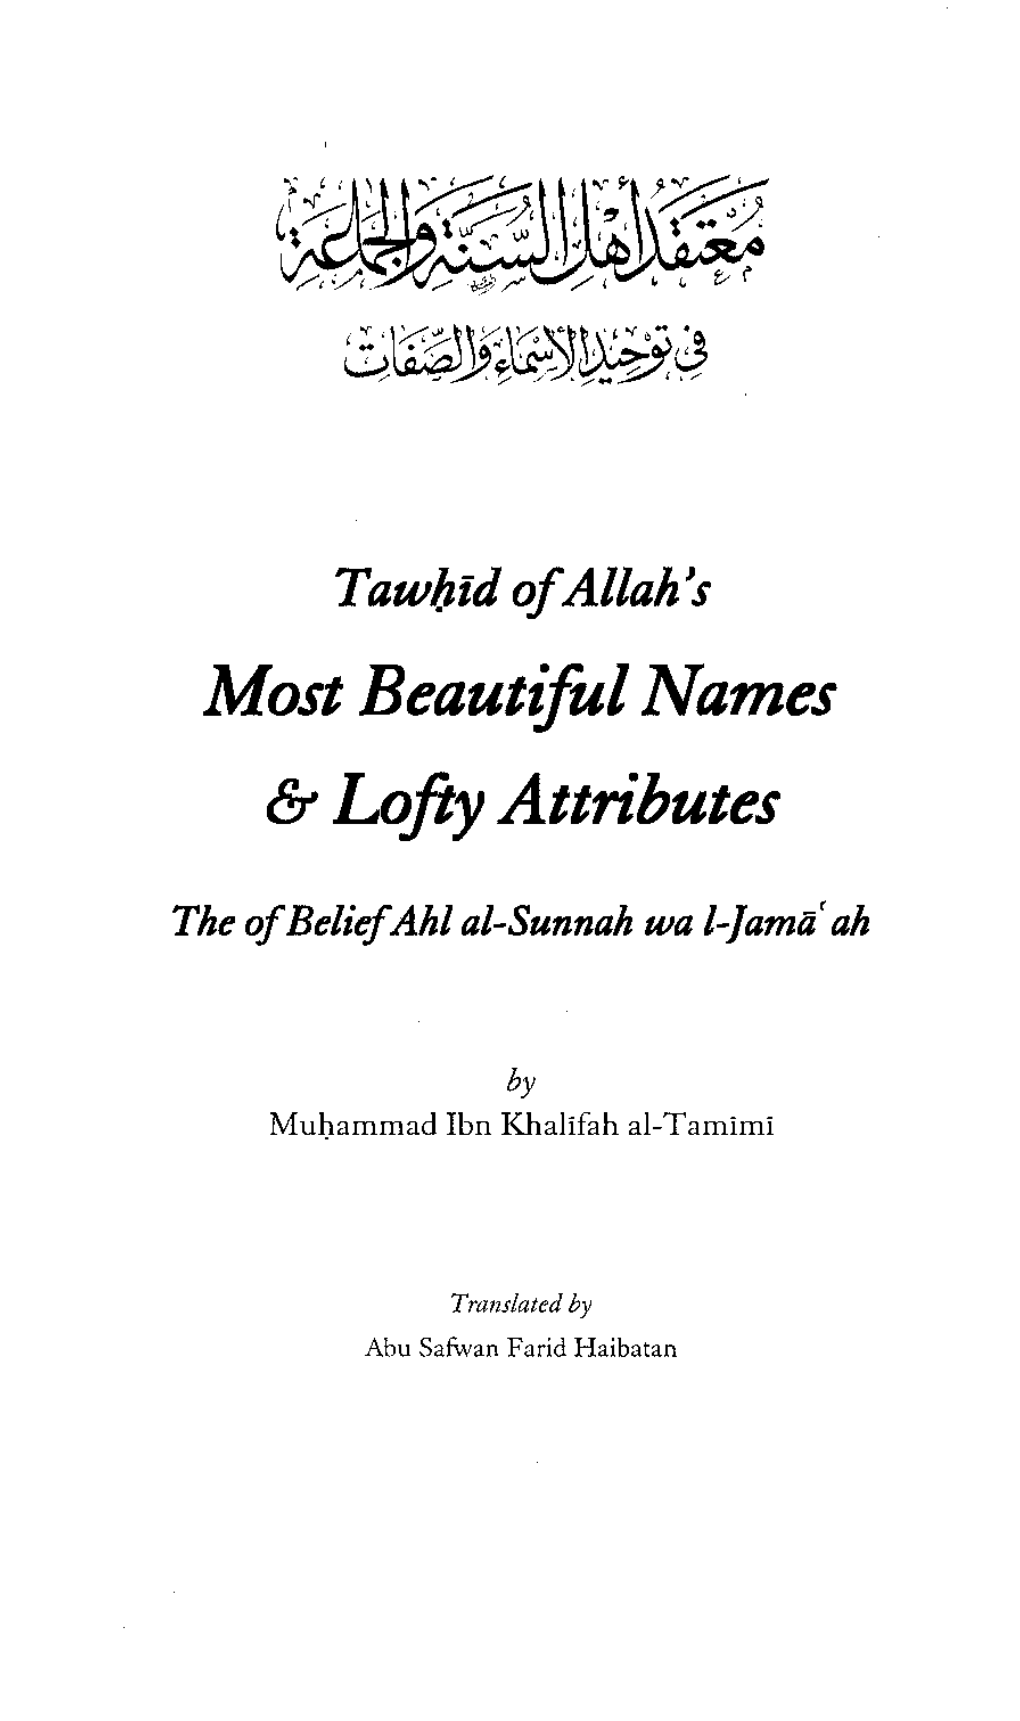 Tawhid of Allah's Most Beautiful Names and Lofty Attributes